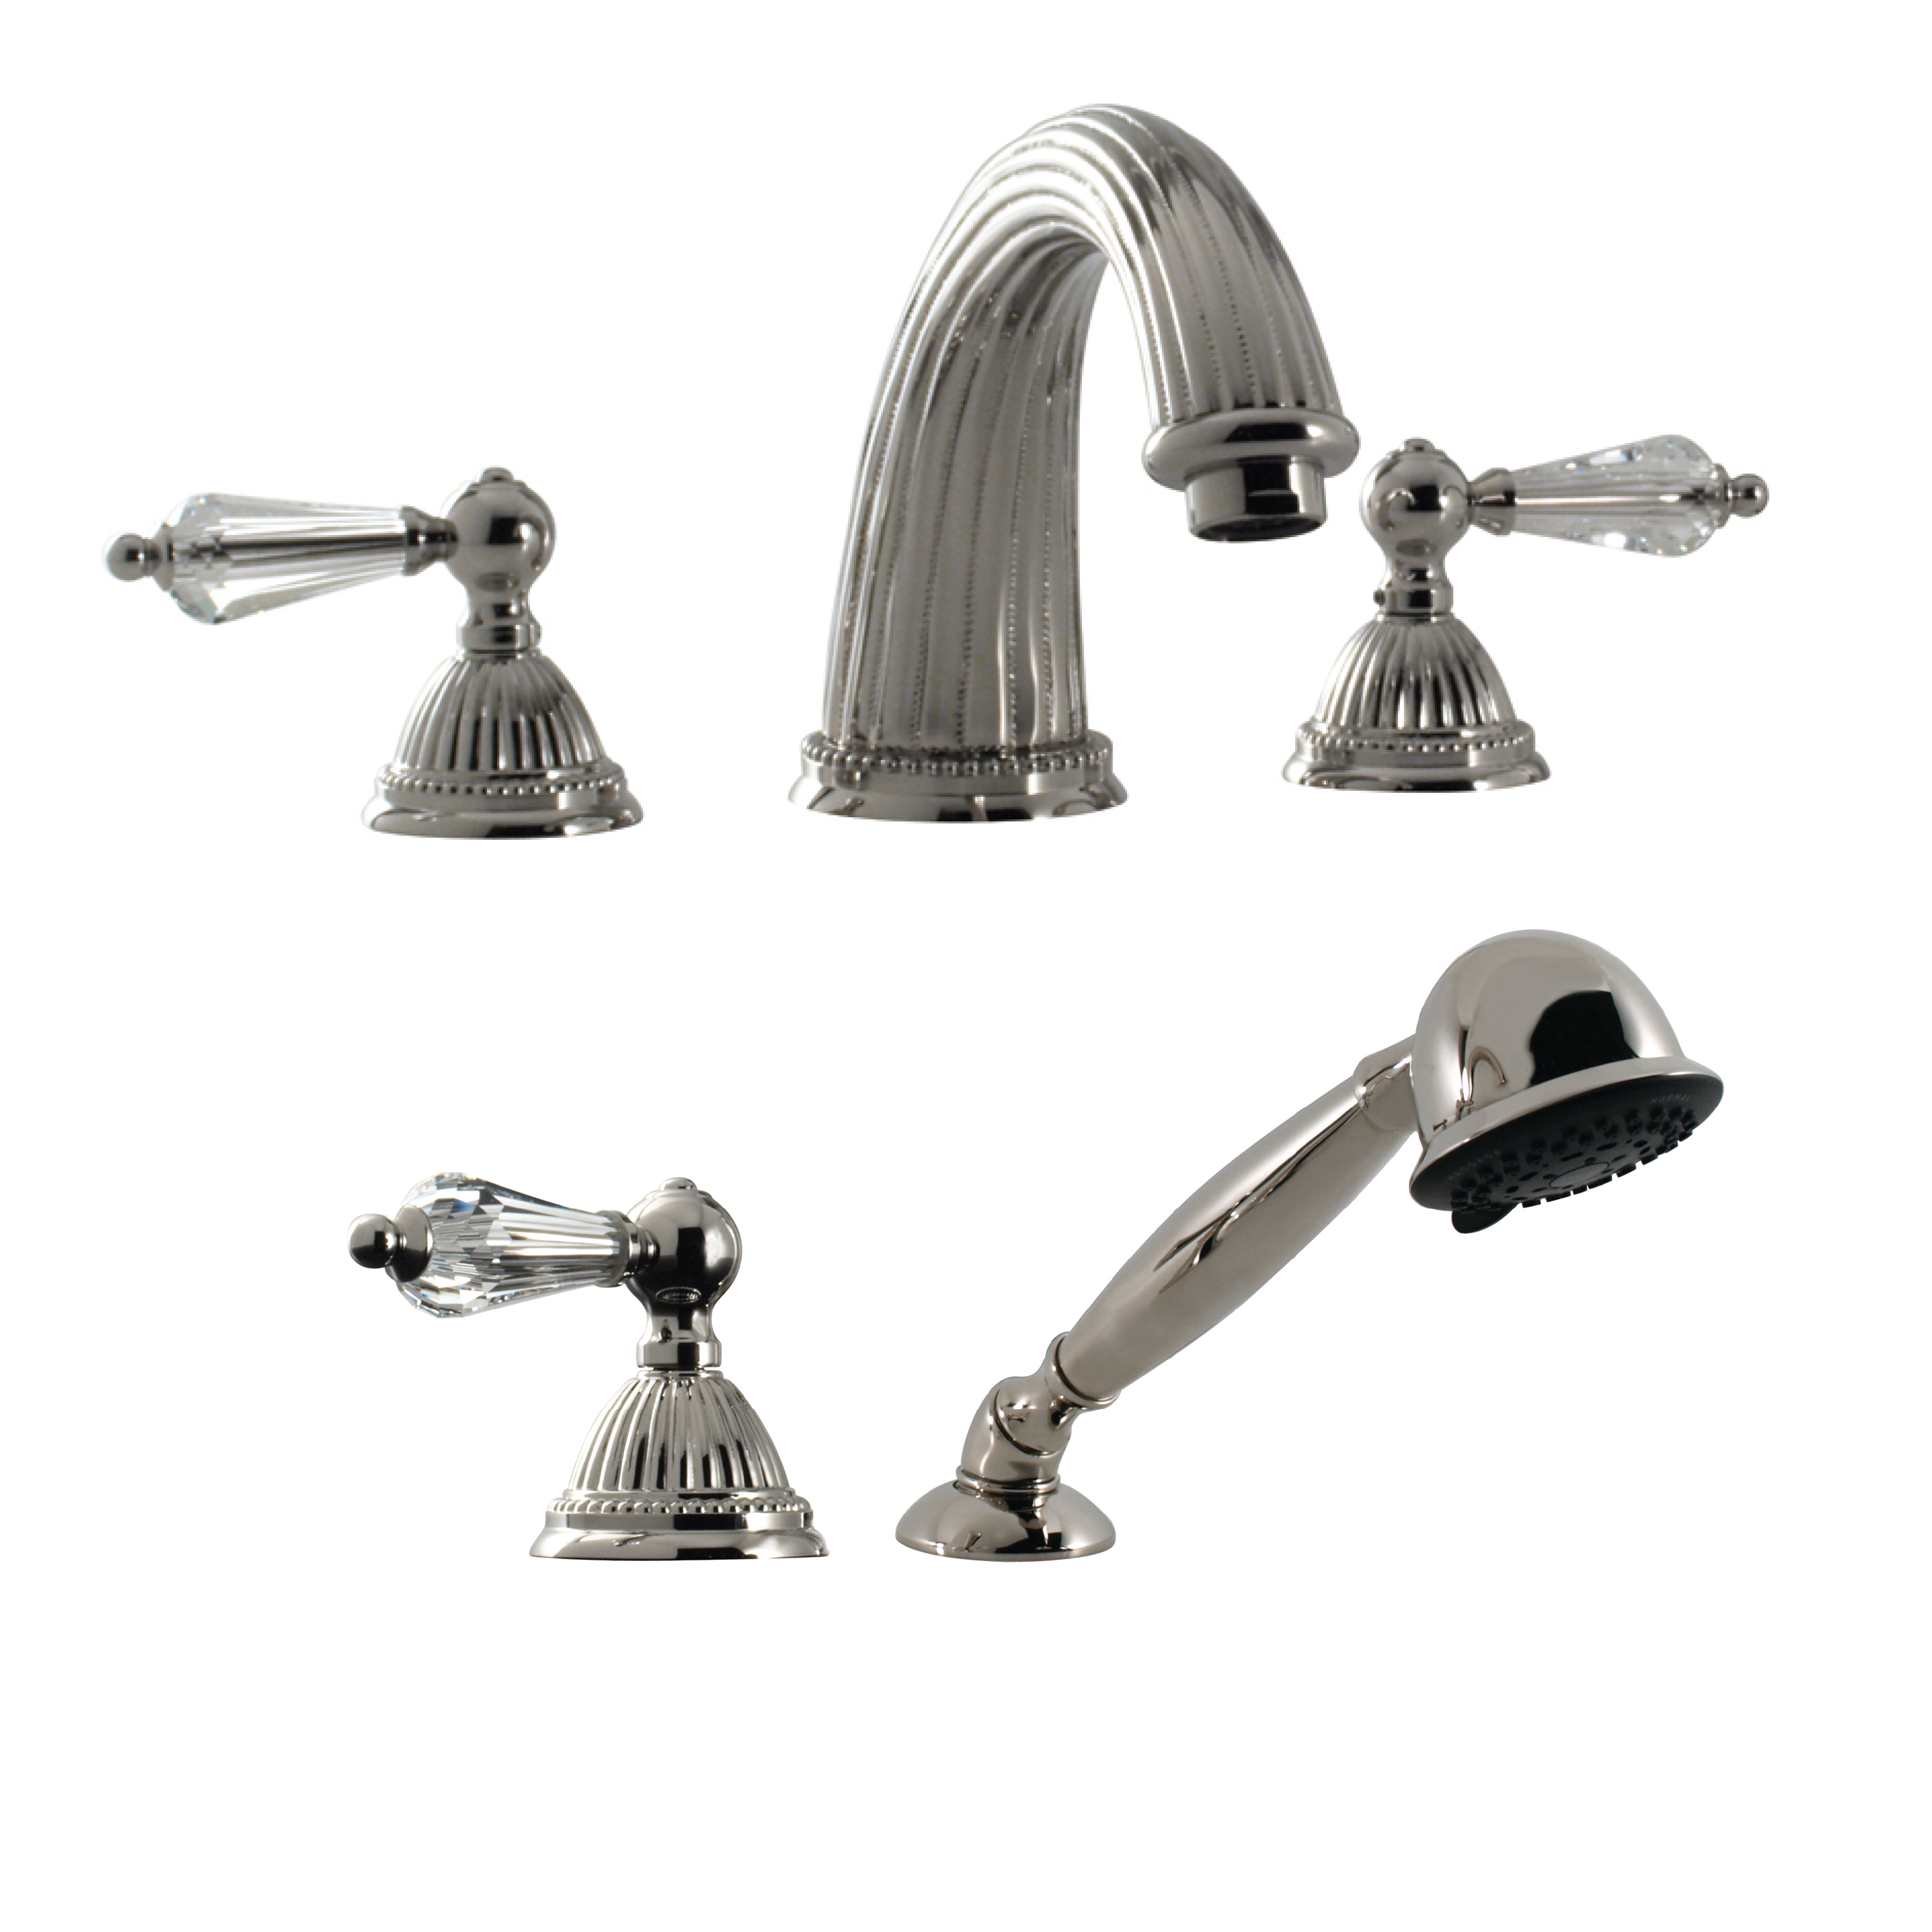 Santec 1155LC10-TM Roman Tub Filler Set with Hand Held Shower with "LC" Handles - Polished Chrome - Click Image to Close